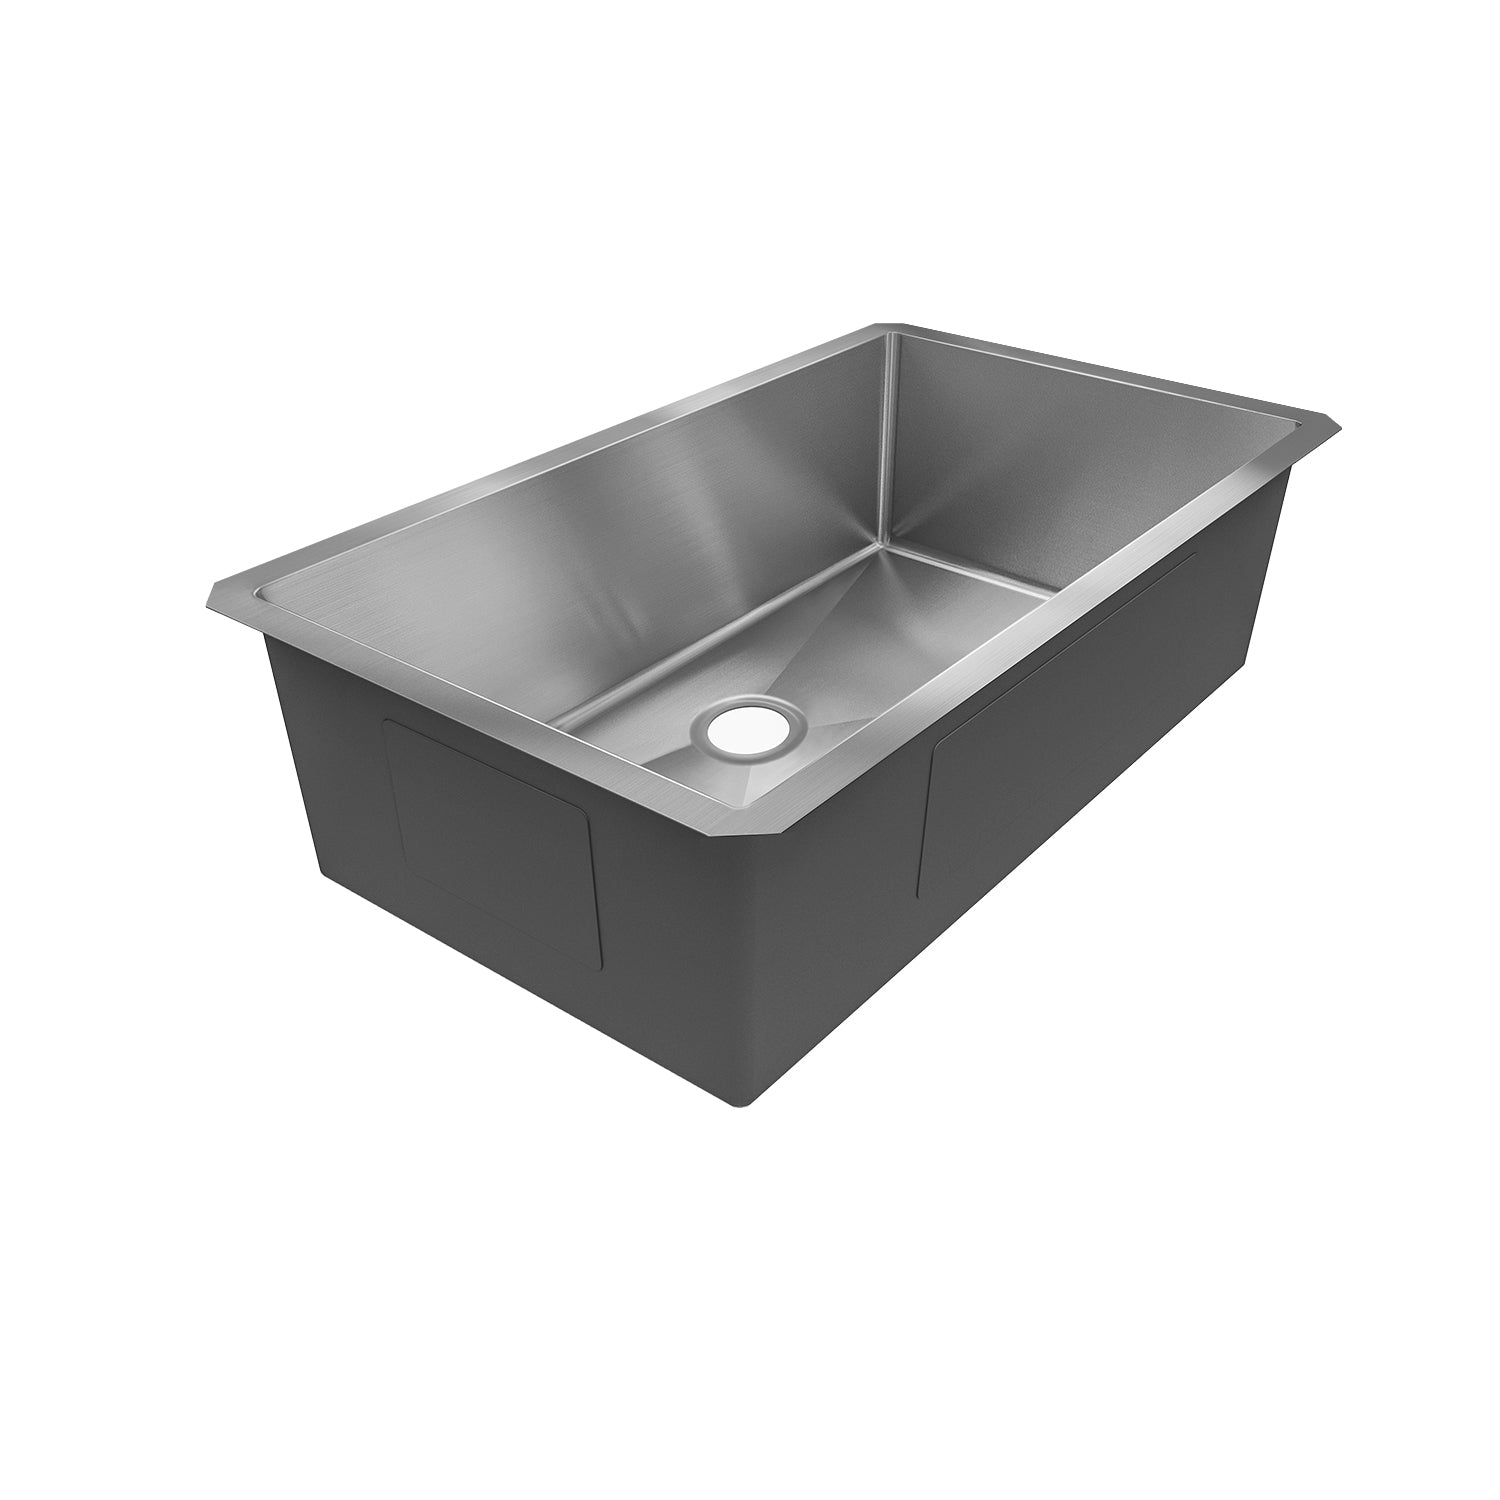 Sinber 32" x 19" x 10" Undermount Single Bowl Kitchen Sink with 18 Gauge 304 Stainless Steel Satin Finish HU3219S-S (Sink Only)